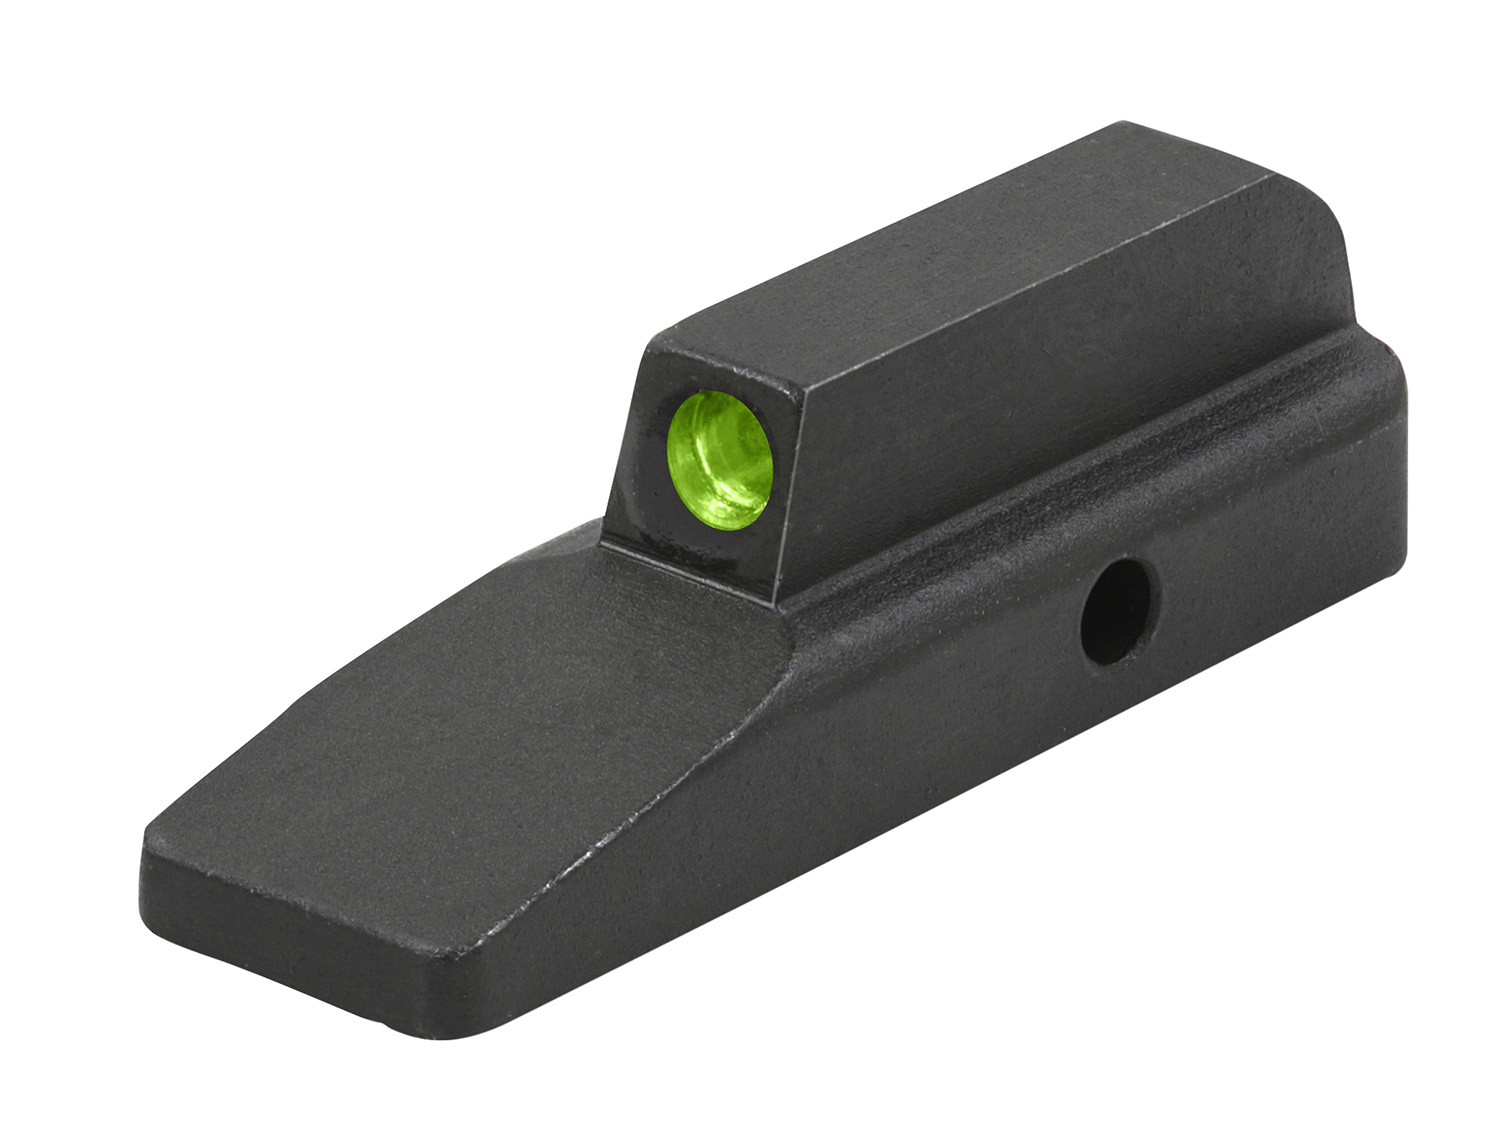 Meprolight USA 109973101 Mepro Tru-Dot Fixed Sights Front Sight Green Tritium with Black Frame for Ruger LCR, LCRx